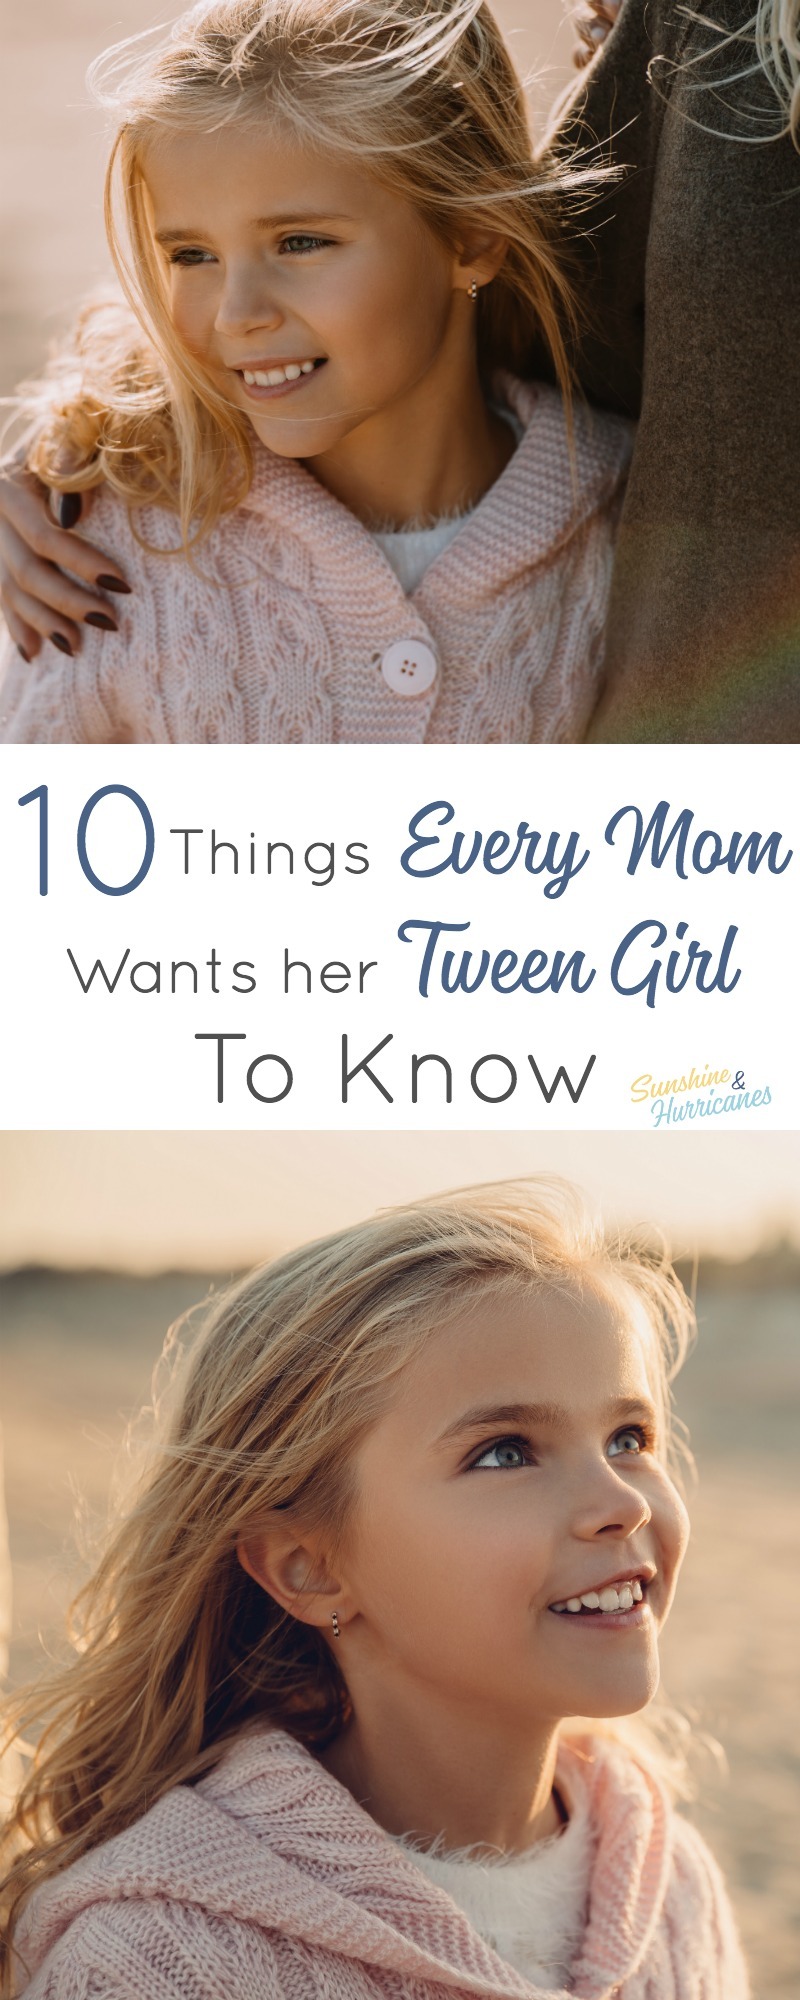 10 Things Every Mom Wants Her Tween Girl To Know